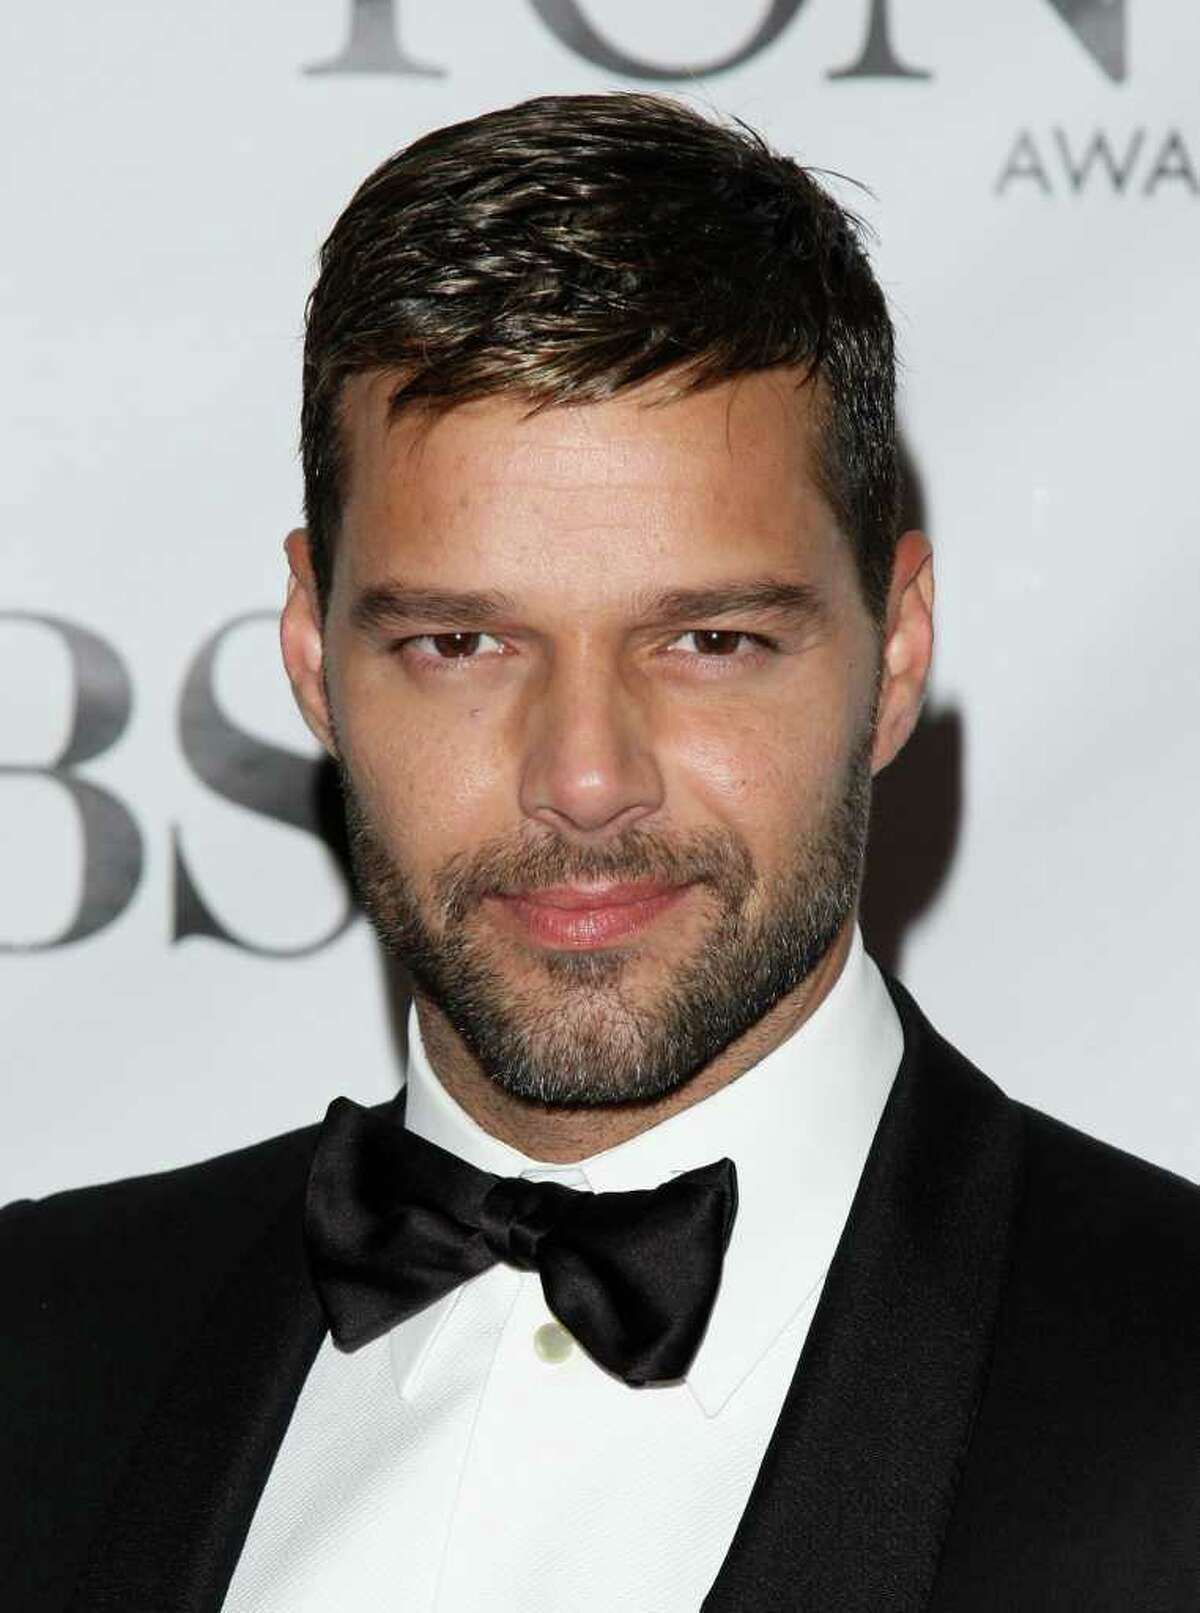 In this June 13, 2010 file photo, Ricky Martin arrives at the 61st Annual Tony Awards in New York.